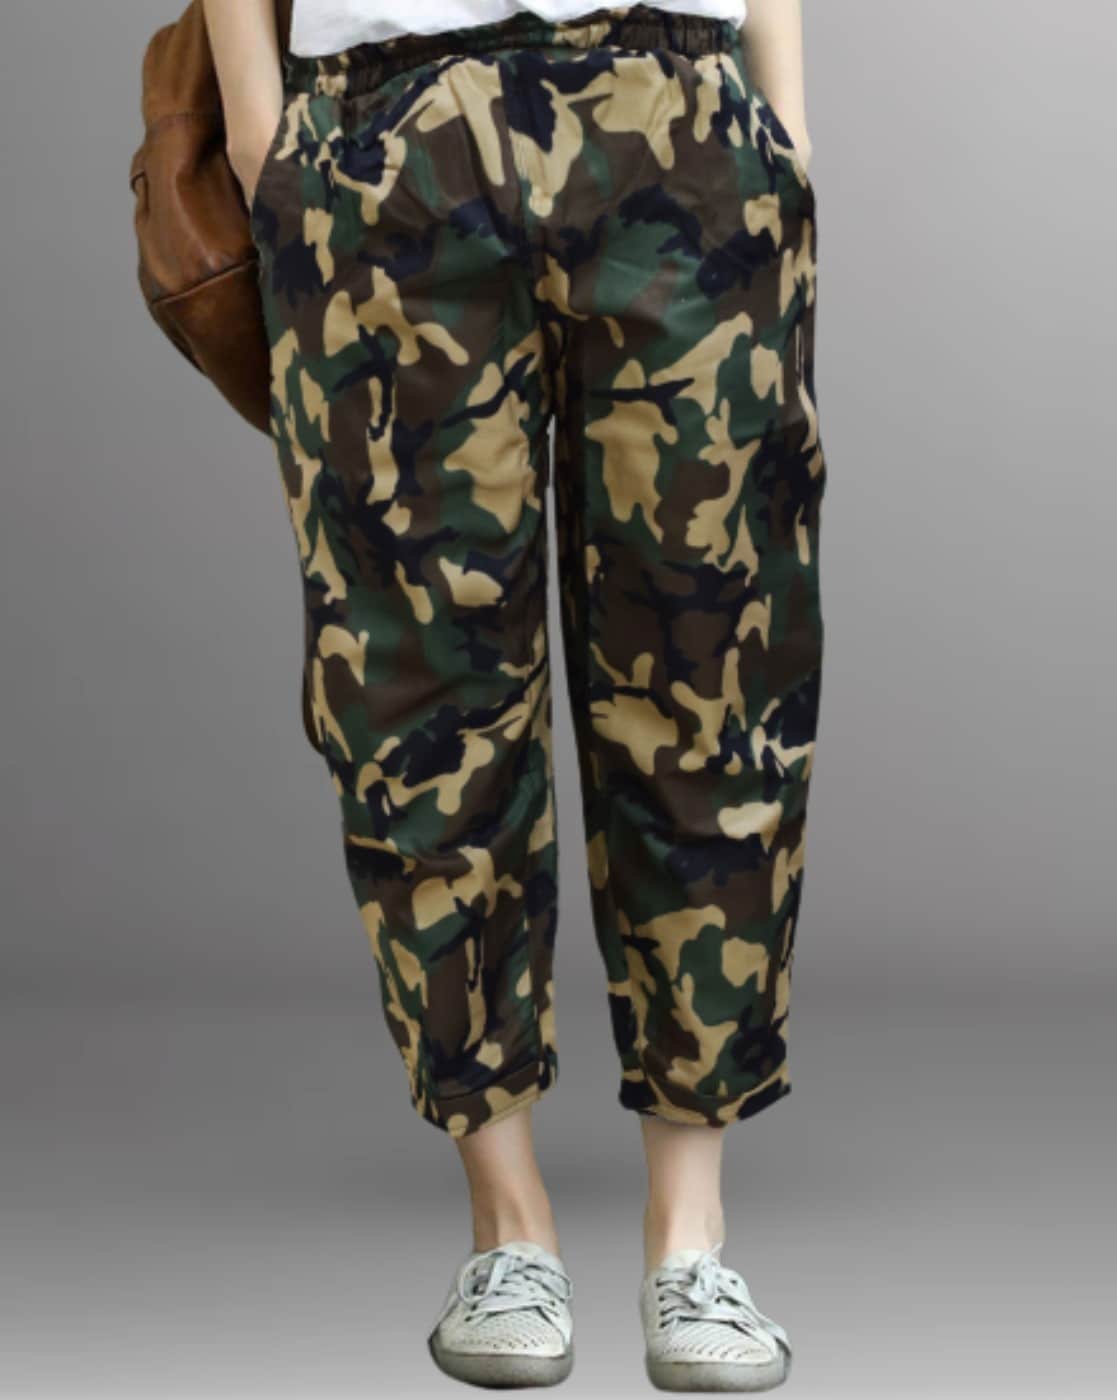 Cute Camo Pants For Women - Different Camouflage Styles